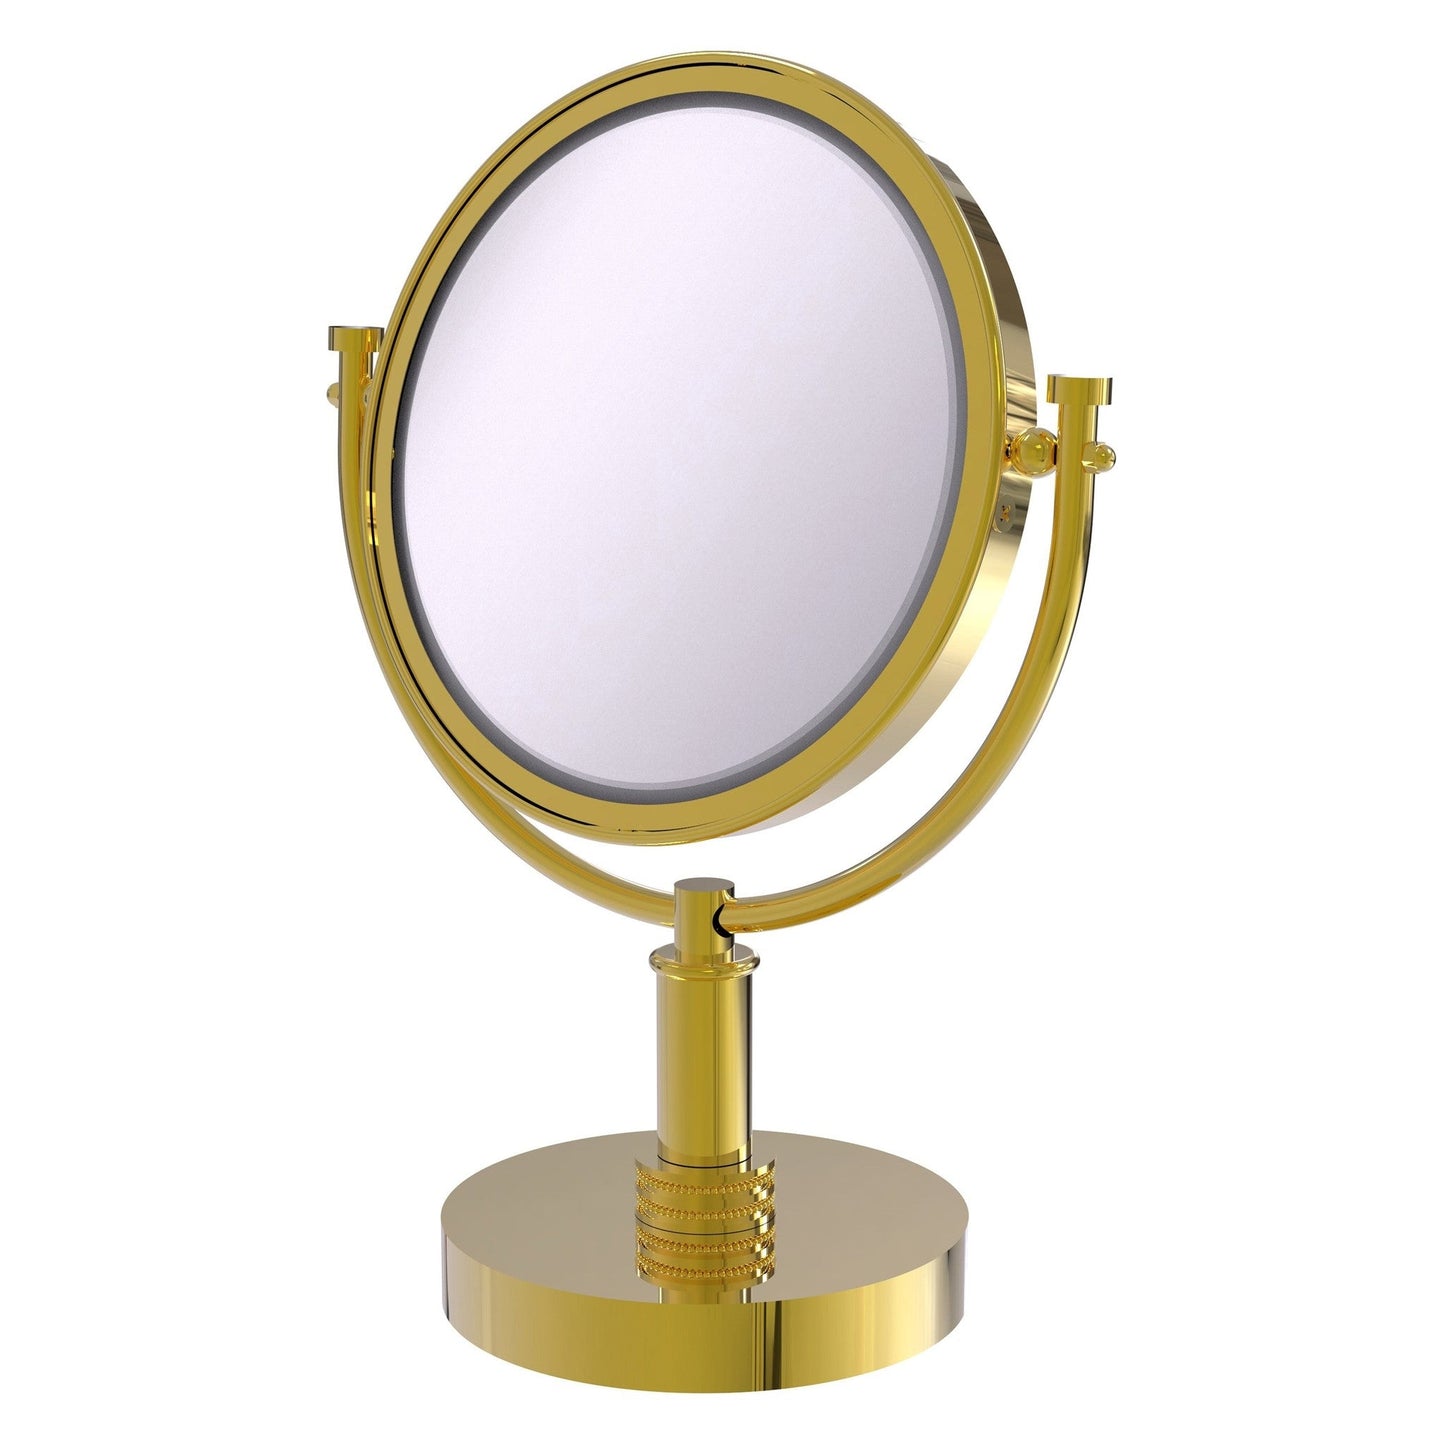 Allied Brass DM-4D/3X 8" x 8" Polished Brass Solid Brass Vanity Top Make-Up Mirror 3X Magnification